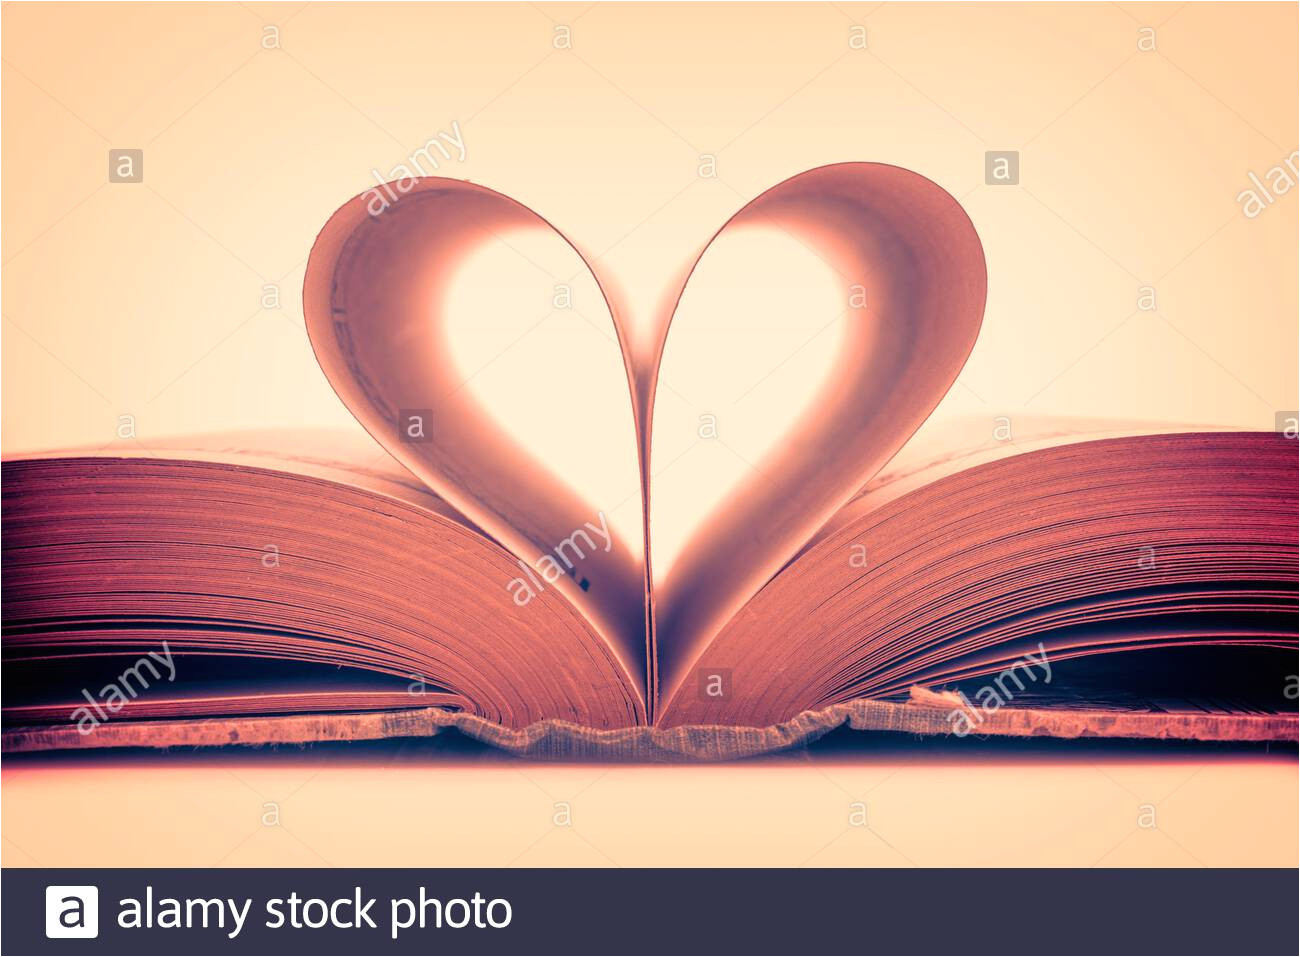 pages of an old book in the shape of a heart valentines day card love concept 2ap05ye jpg